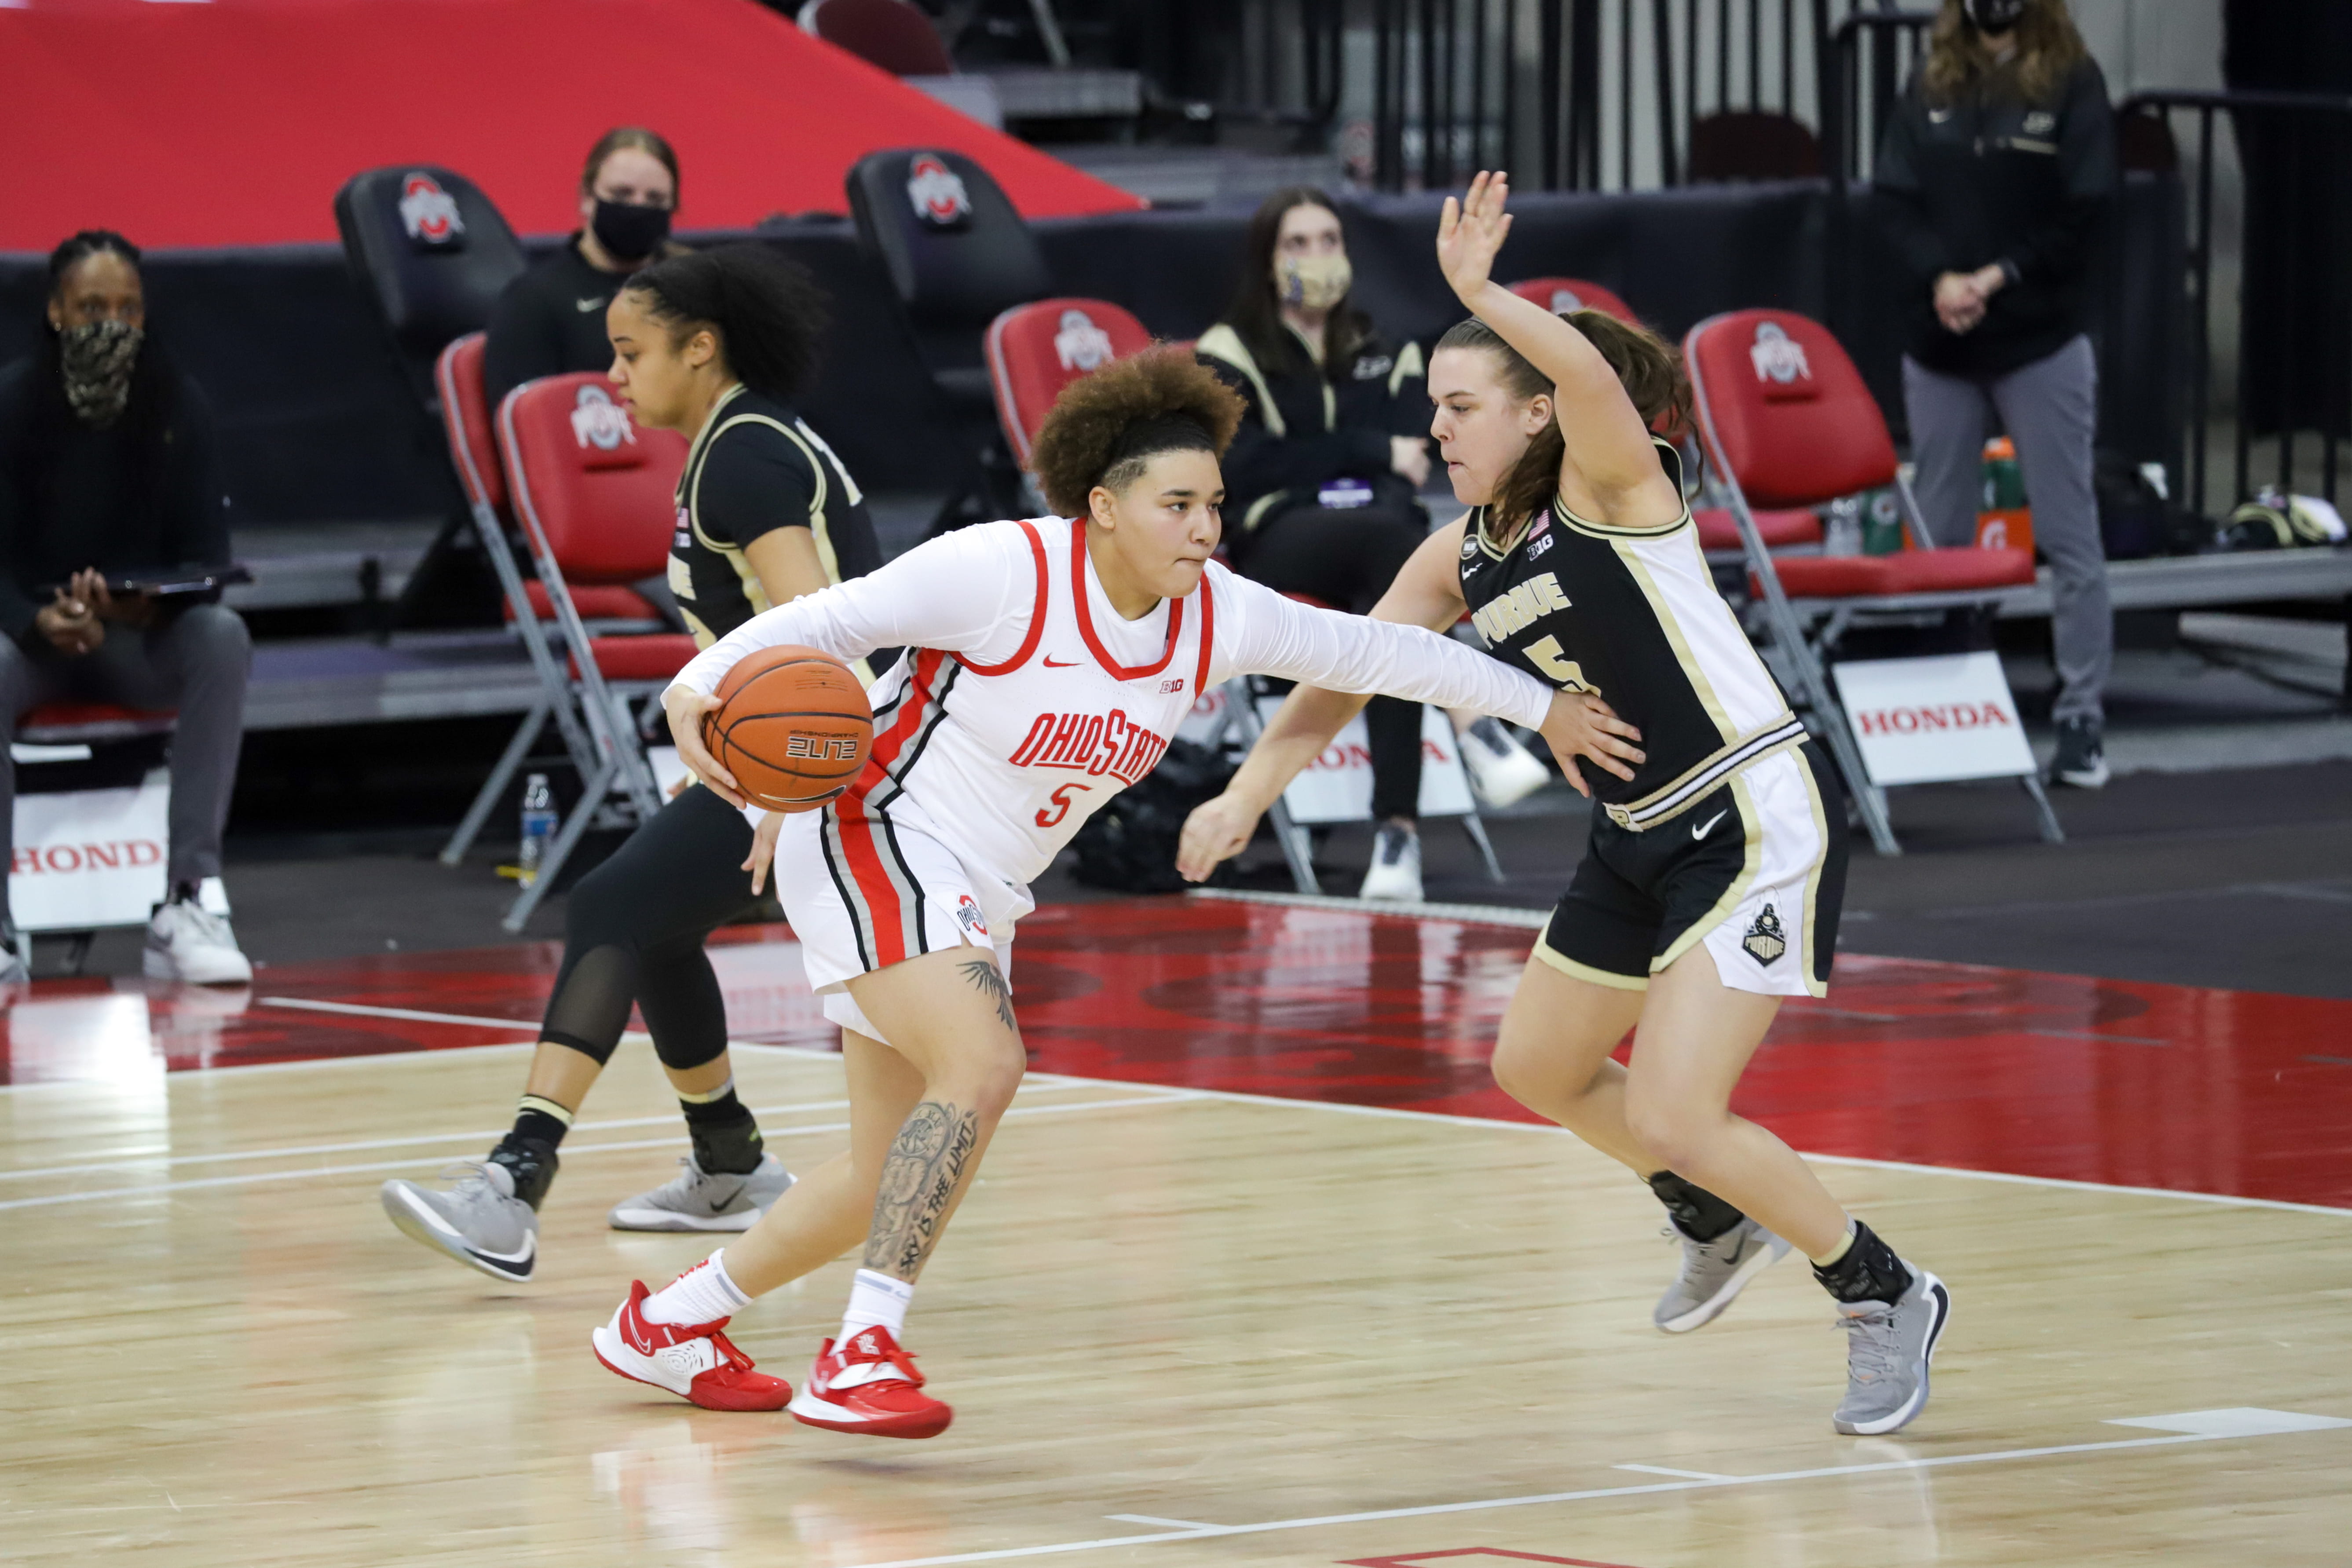 Women’s Basketball: No. 15 Ohio State goes for season sweep of Penn State